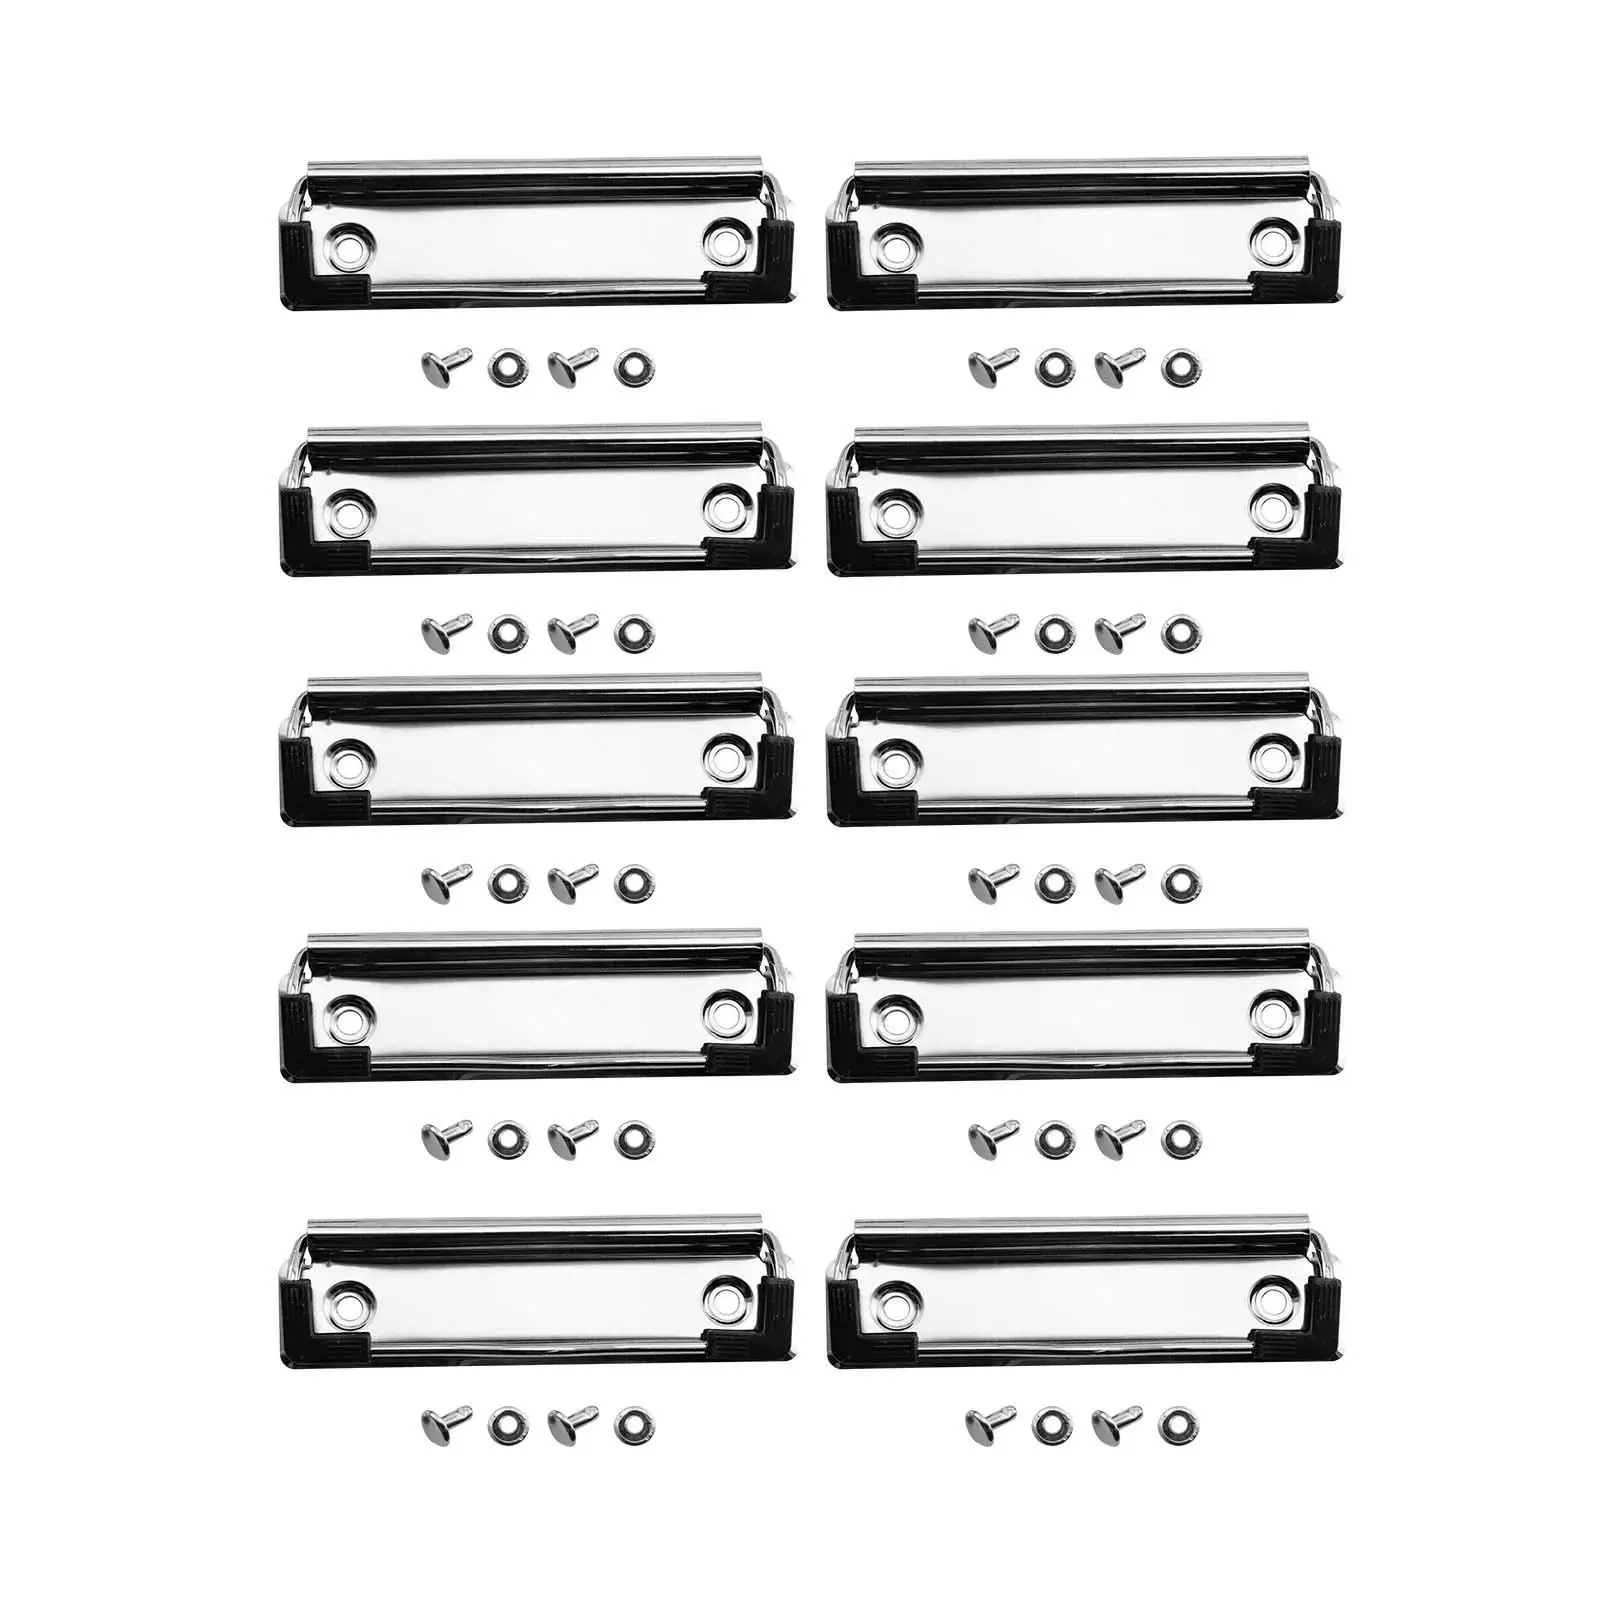 10x Mountable Clipboard Clips Iron Lightweight with Rubber Feet Document File Board Clips for Stationery Supplies Business Class